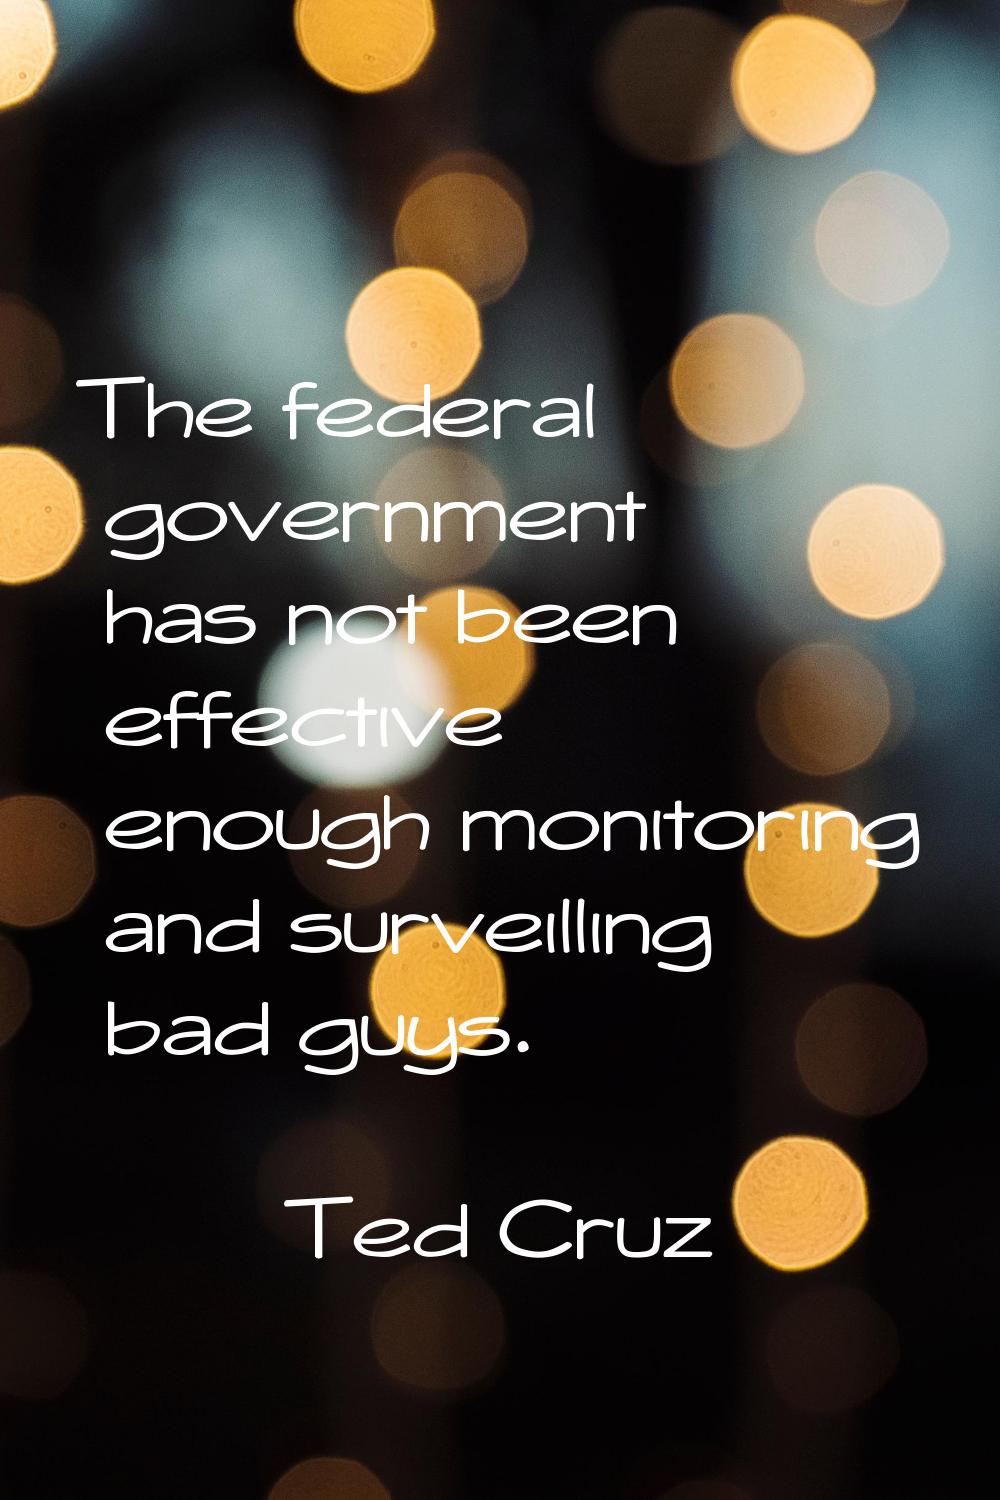 The federal government has not been effective enough monitoring and surveilling bad guys.